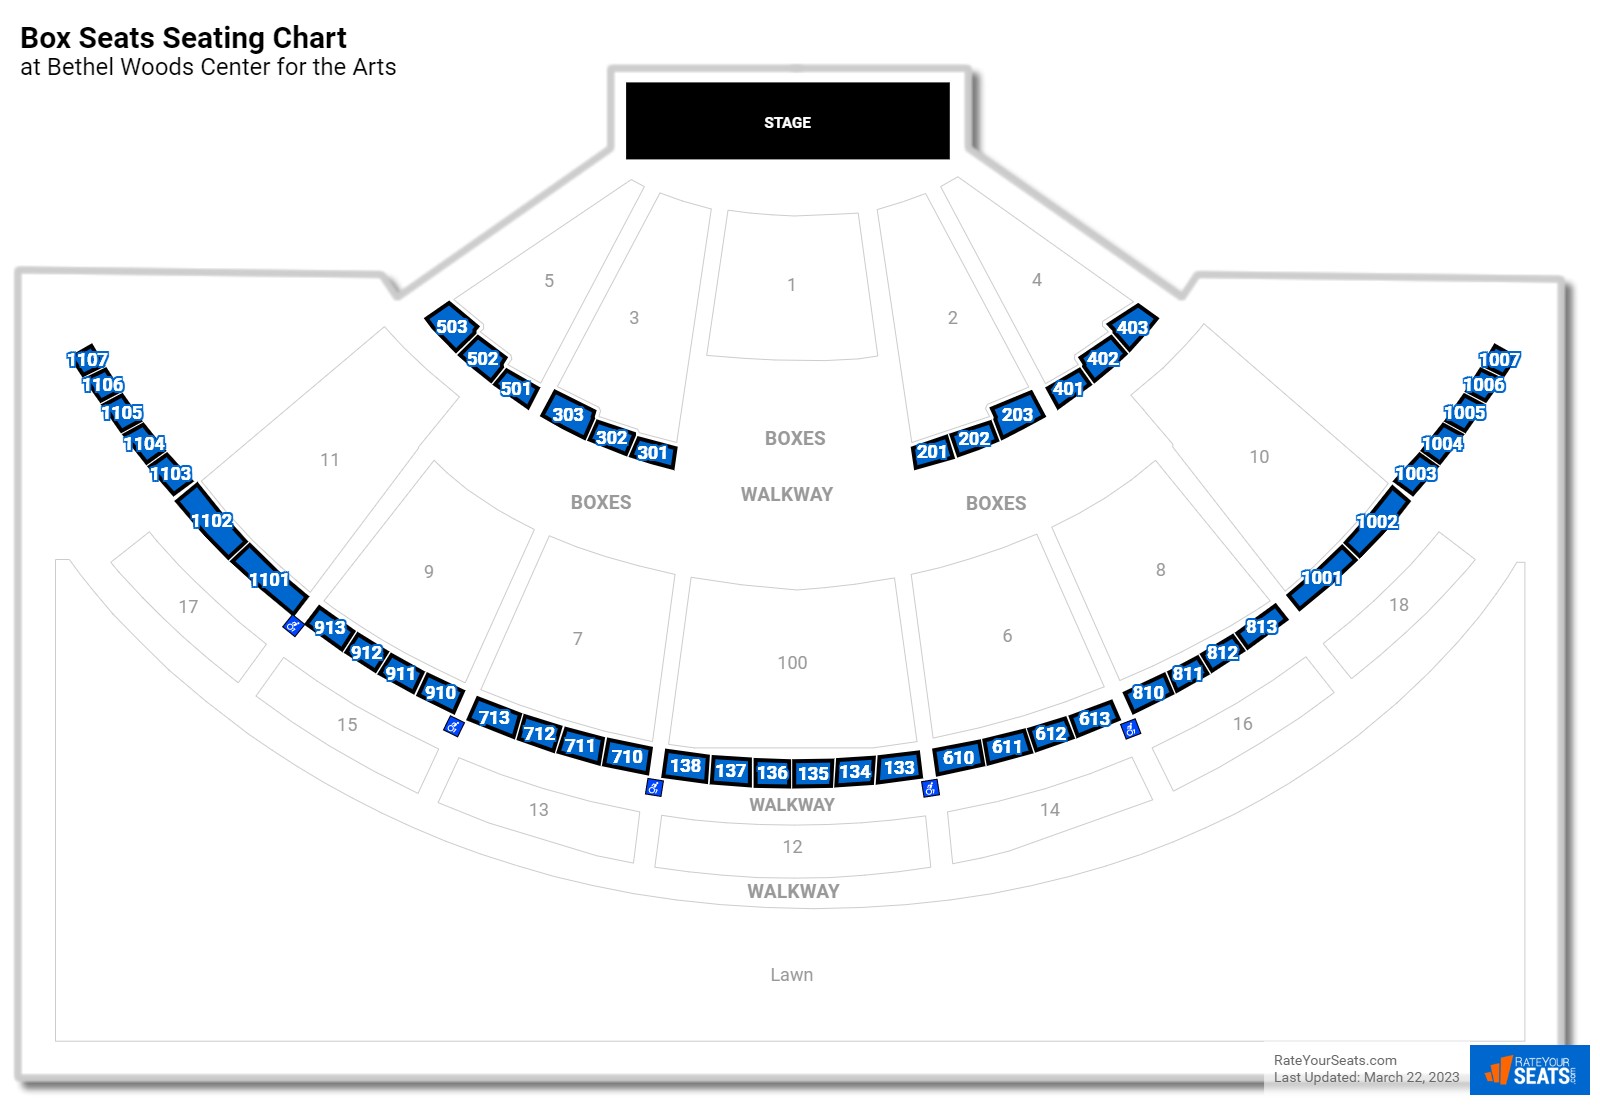 Concert Box Seats Seating Chart at Bethel Woods Center for the Arts